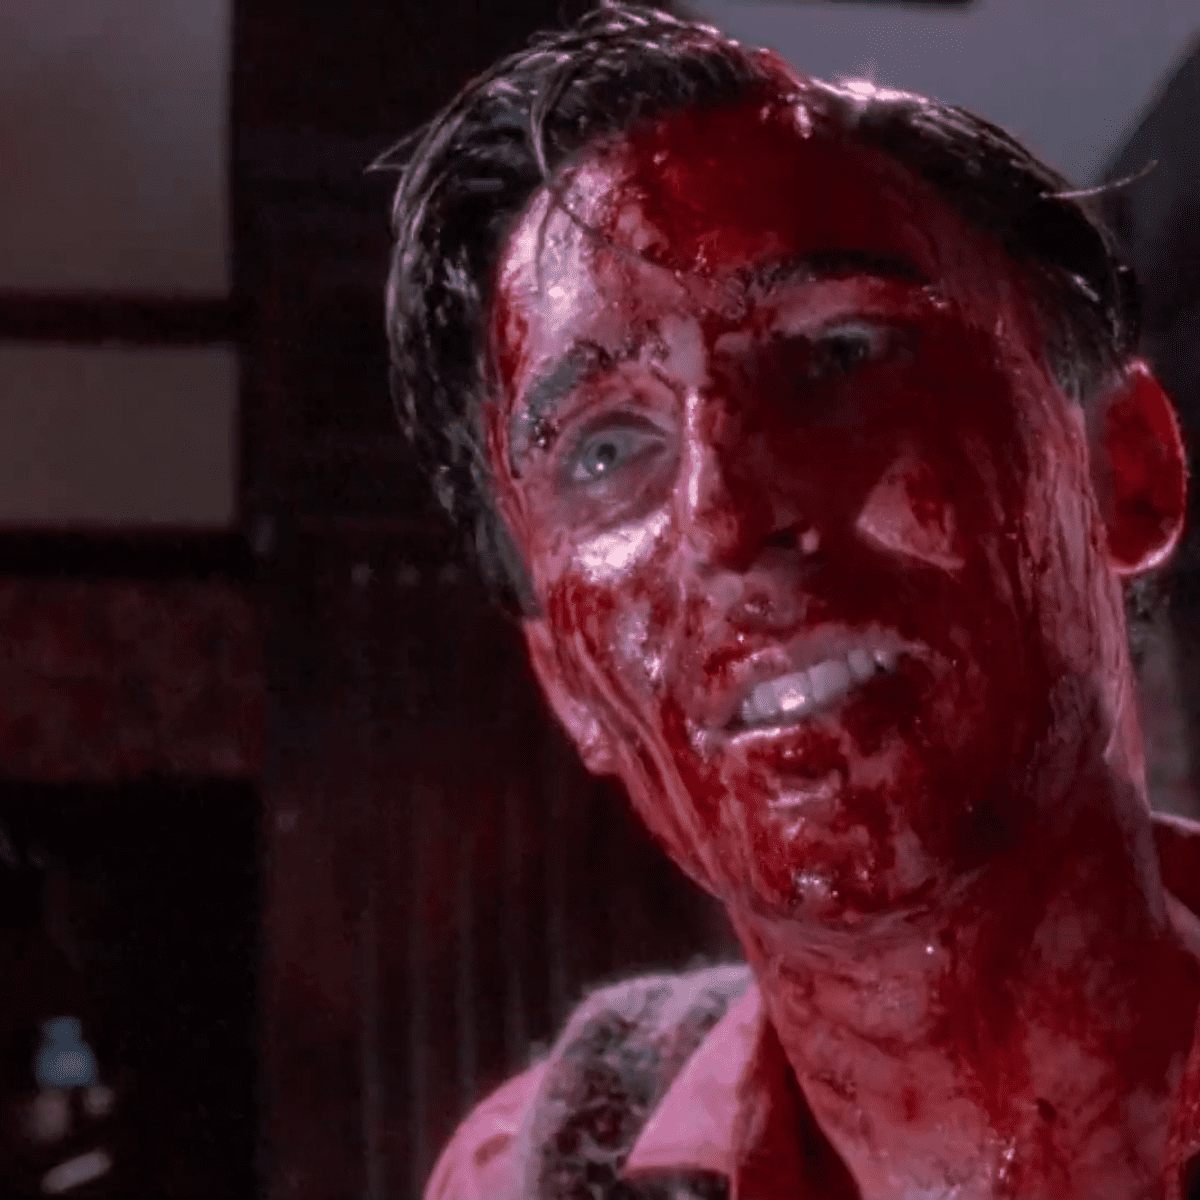 Dead Alive Movie Review